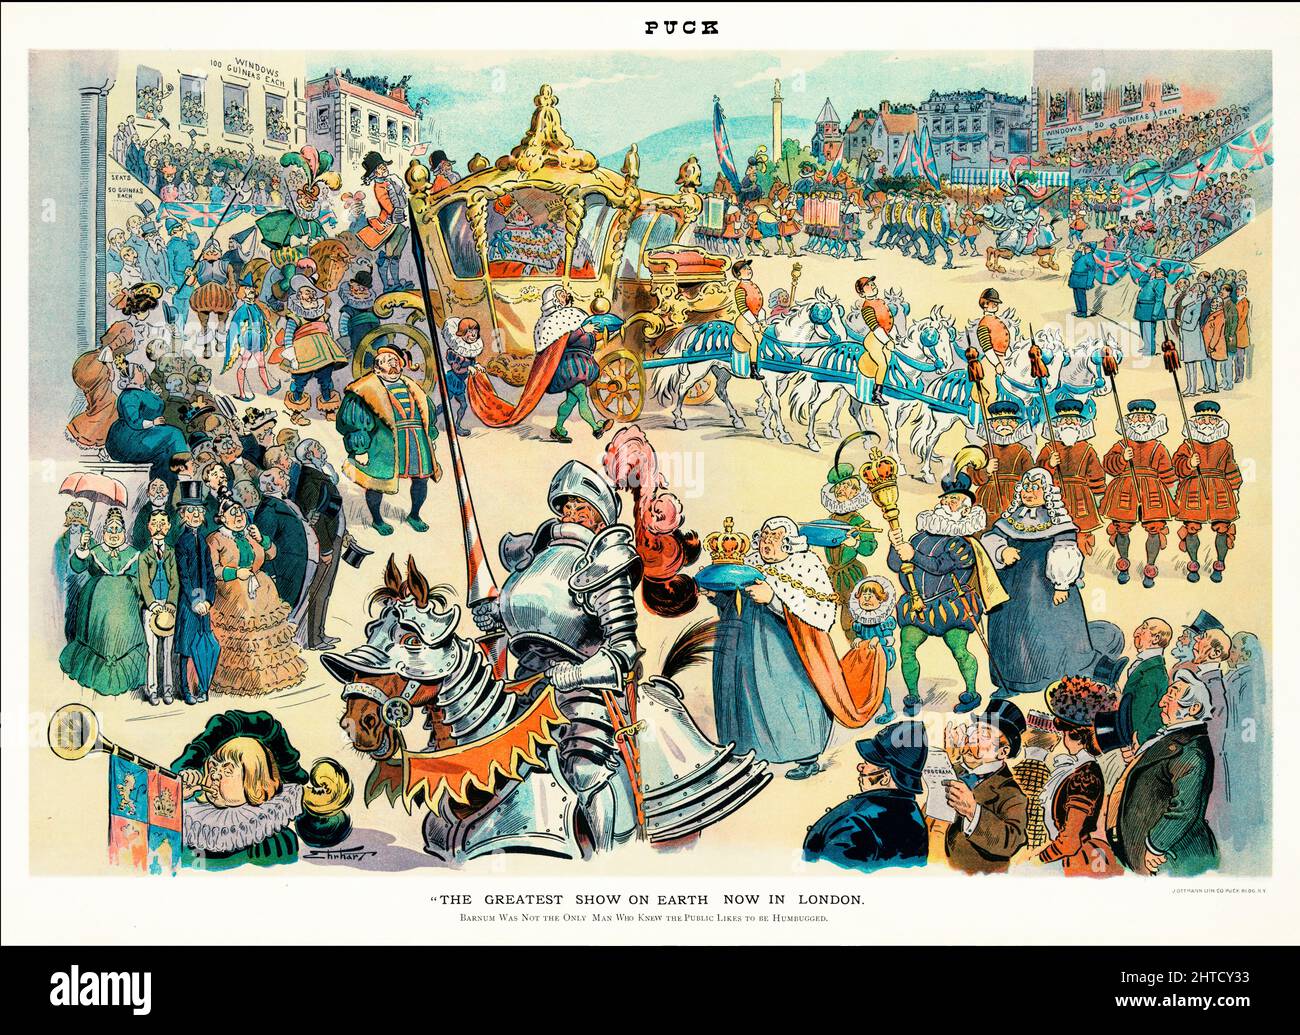 An early 20th century American Puck Magazine illustration of the procession for the coronation of Edward VII, King of Great Britain; many of those participating in the pageantry are wearing medieval costume. The caption refers to Barnum and 'the Greatest Show on Earth'. Stock Photo